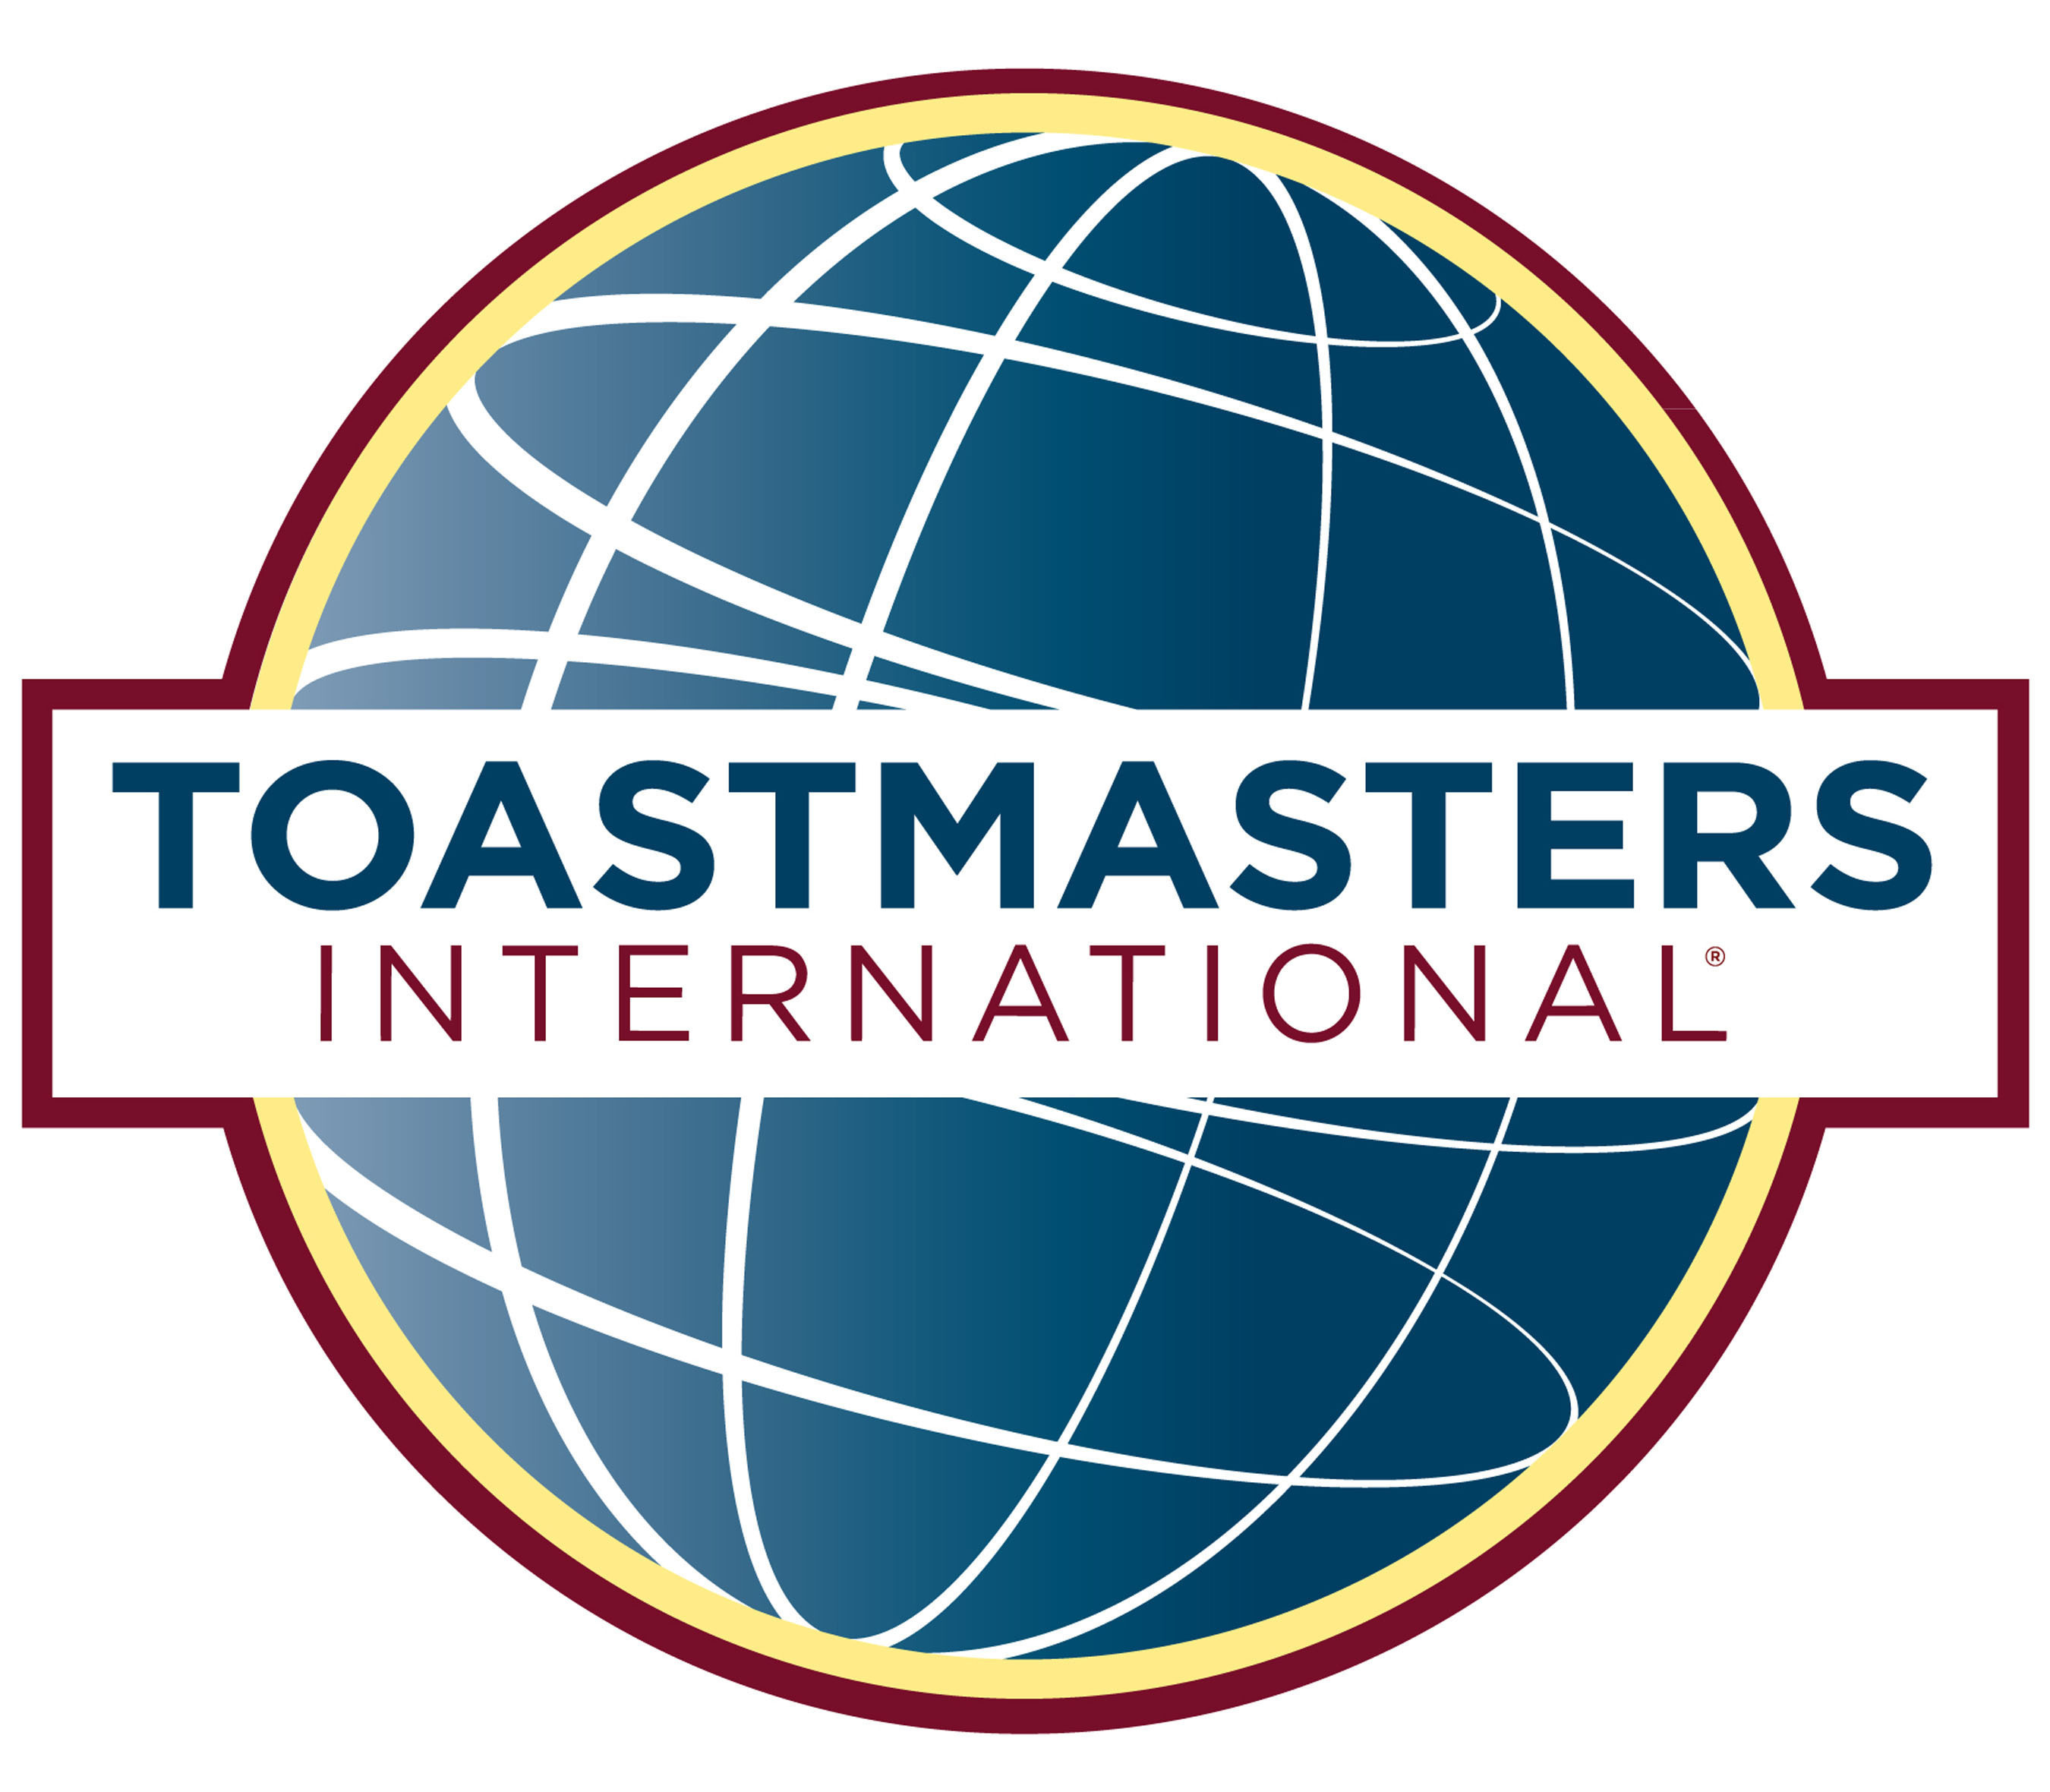 toastmasters-experience-benefits-those-seeking-public-office-rancho